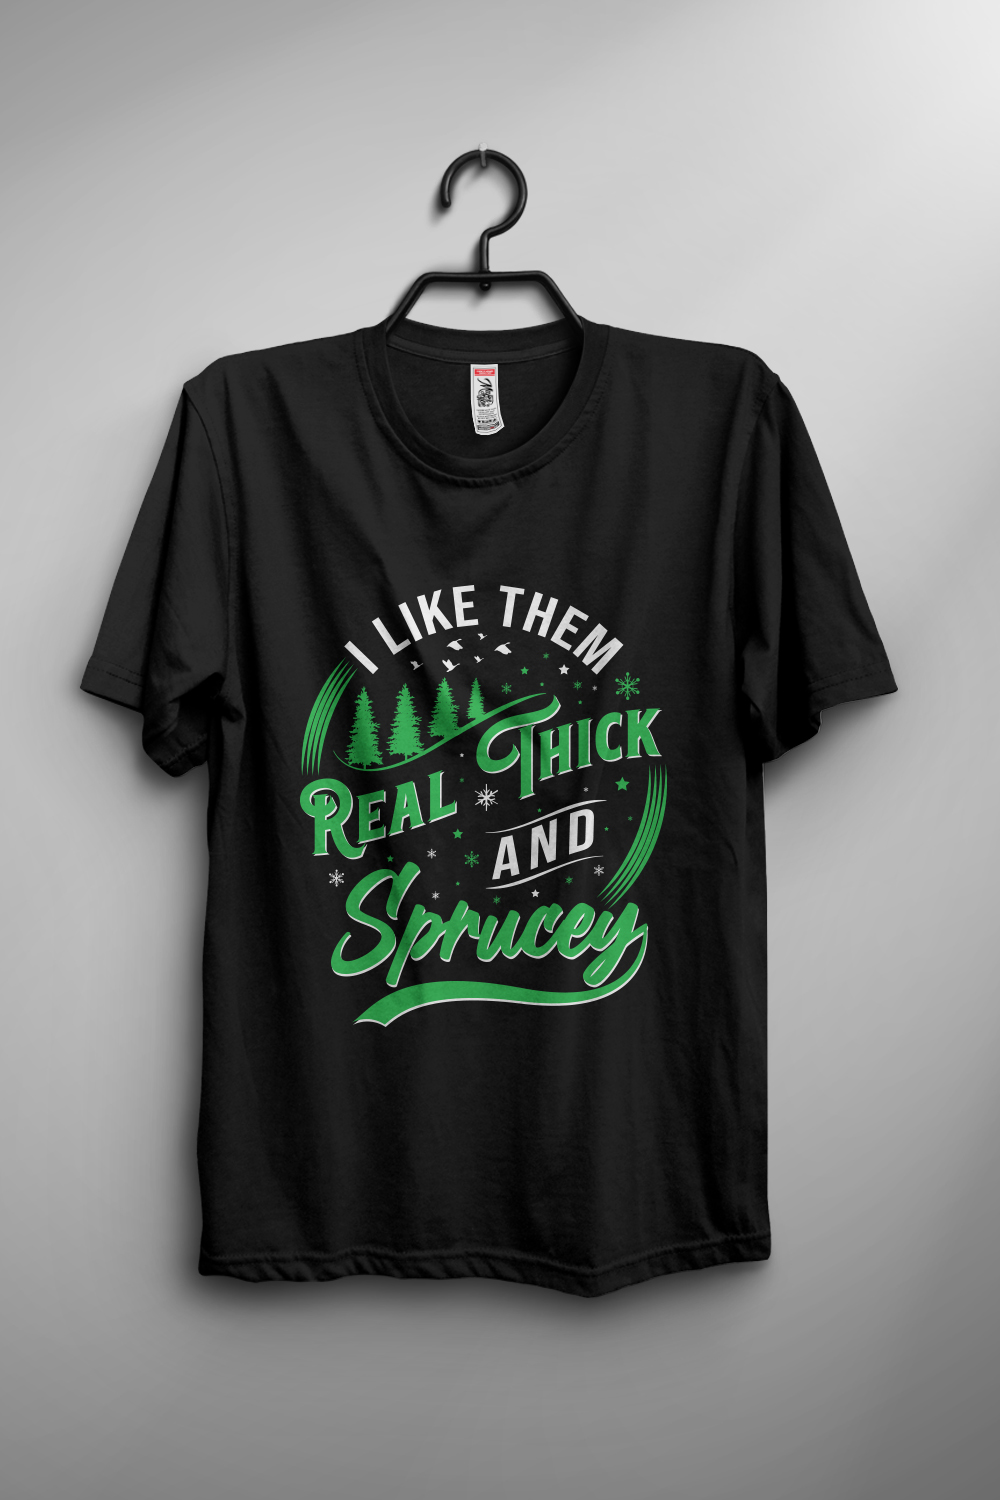 I Like Them Real Thick And Sprucey T-shirt design pinterest preview image.